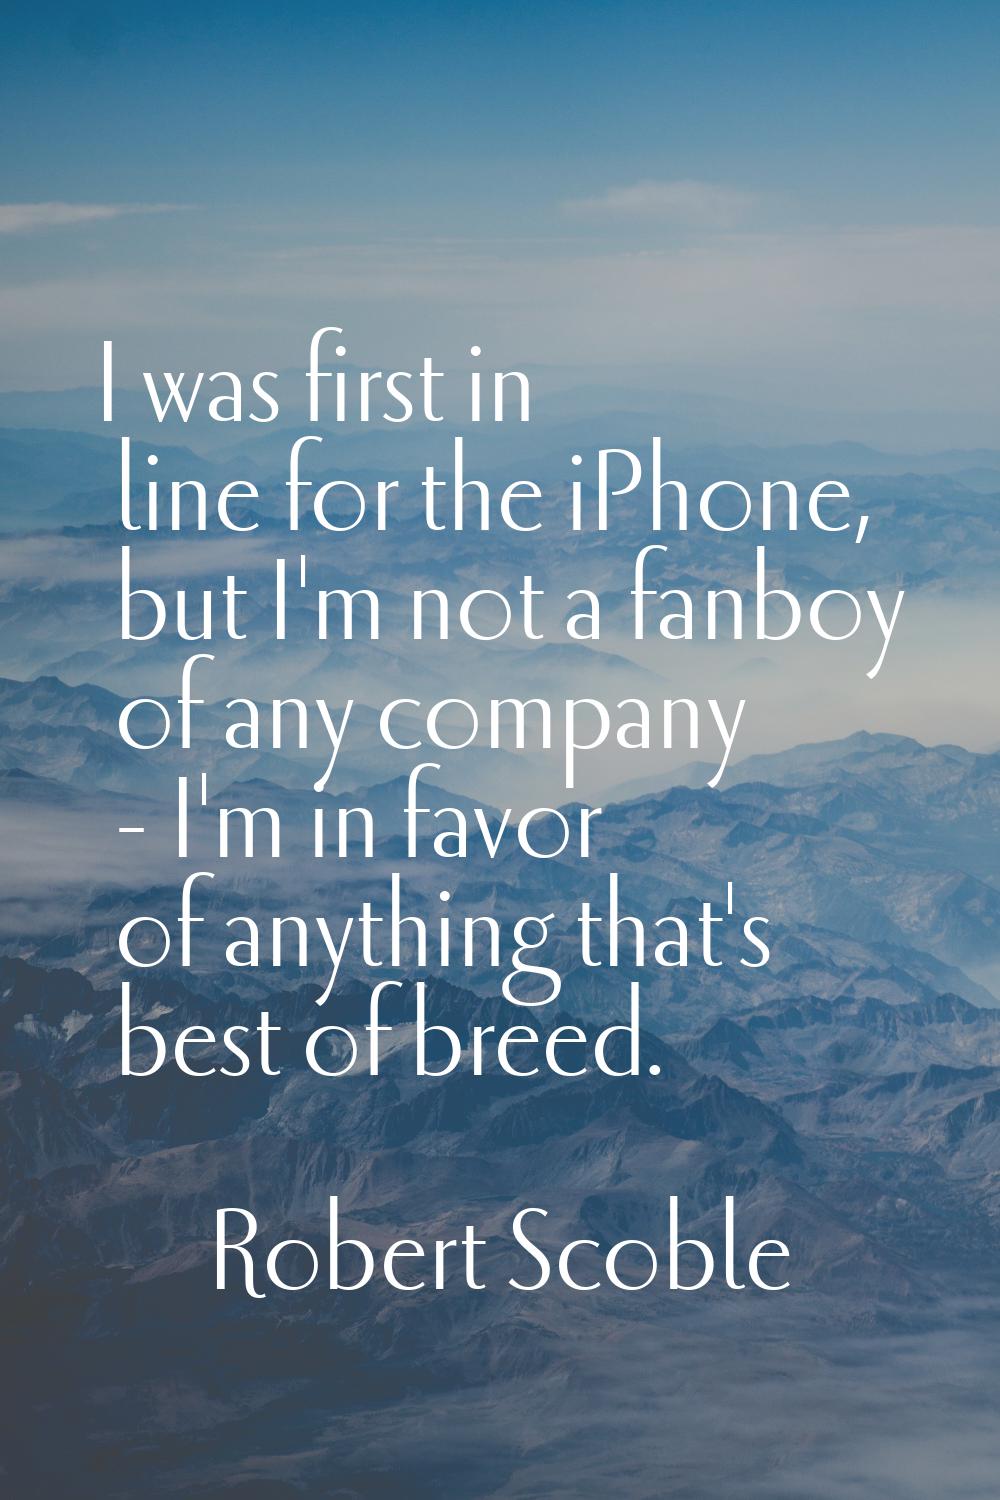 I was first in line for the iPhone, but I'm not a fanboy of any company - I'm in favor of anything 